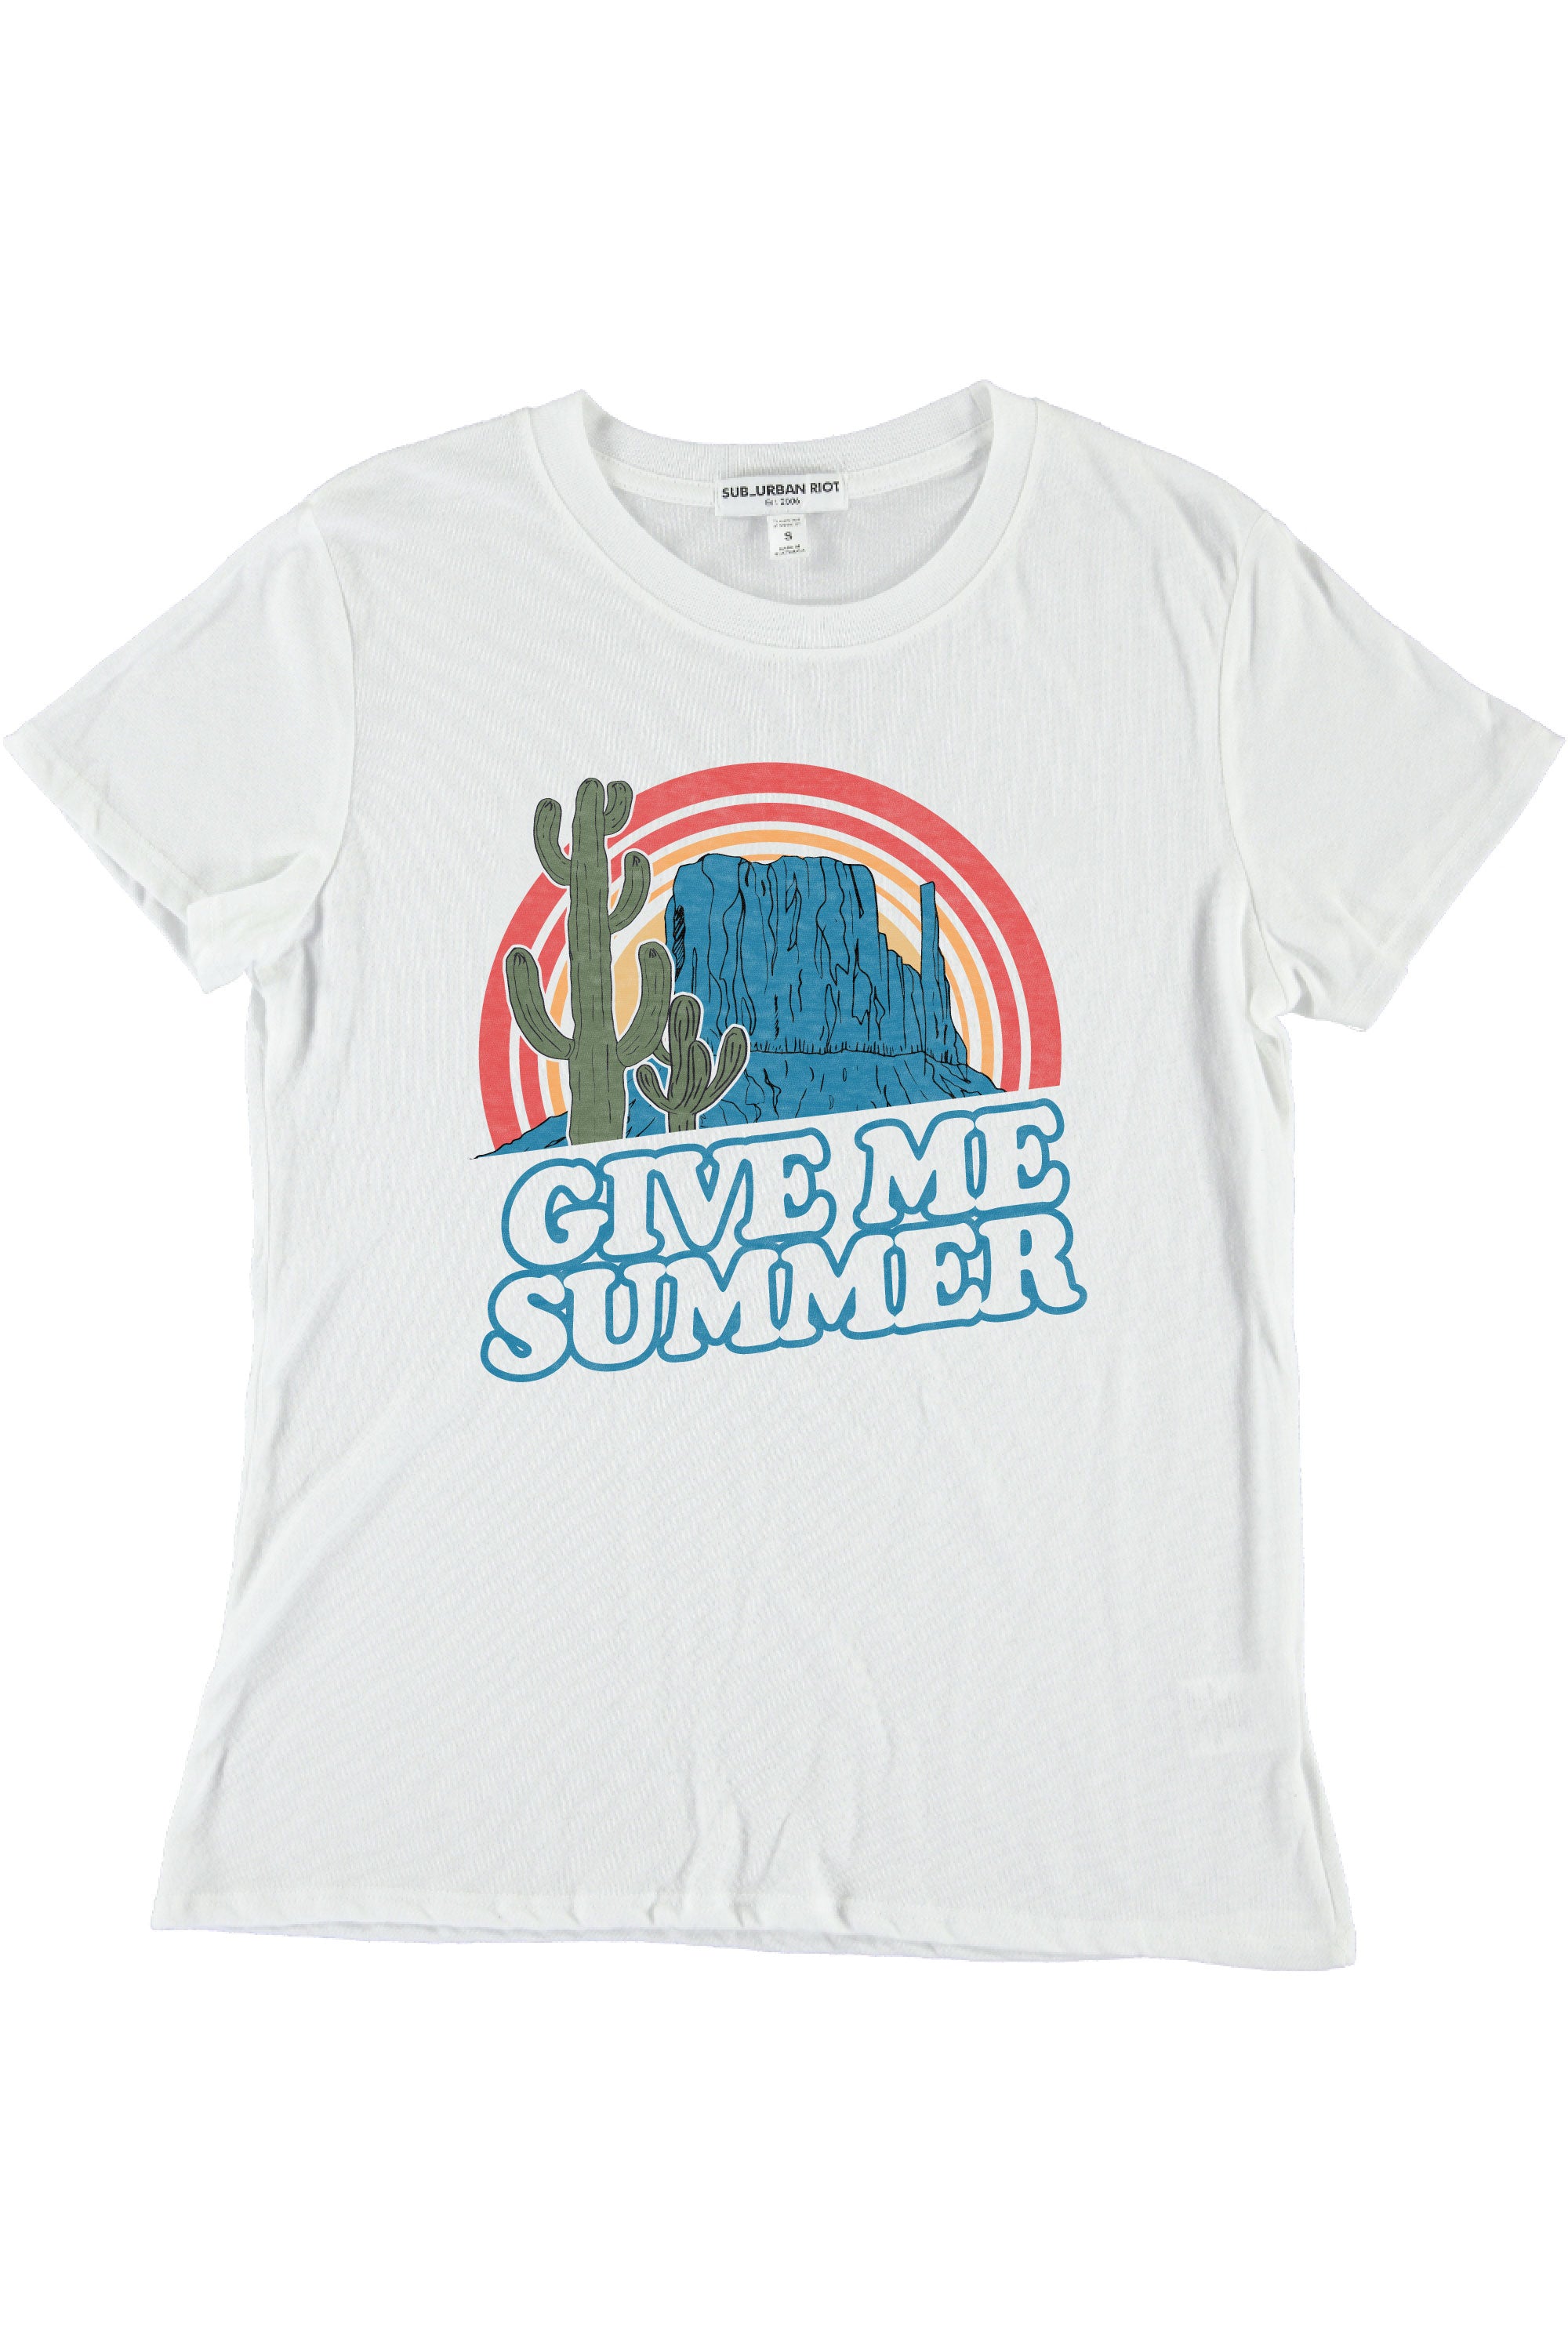 GIVE ME SUMMER YOUTH SIZE LOOSE TEE